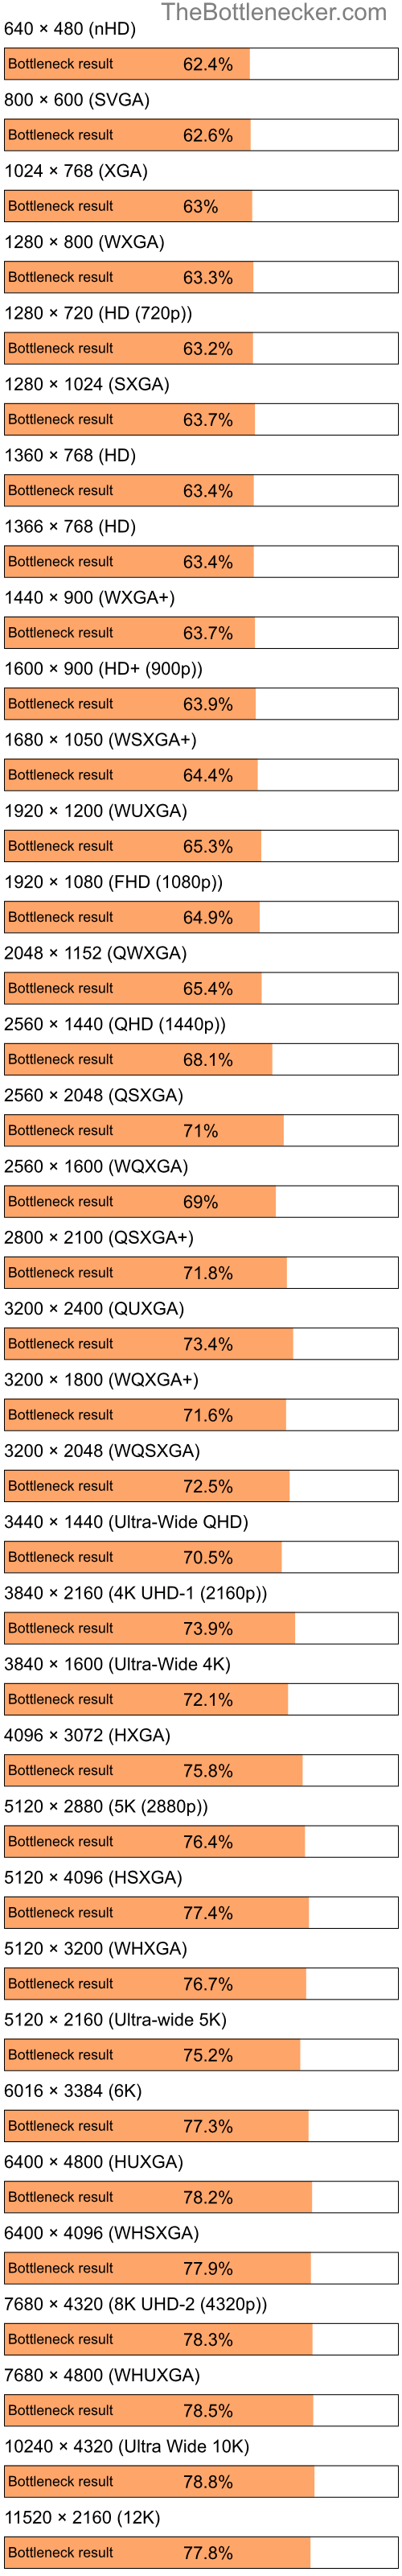 Bottleneck results by resolution for Intel Atom Z520 and AMD Radeon HD 6290 in7 Days to Die